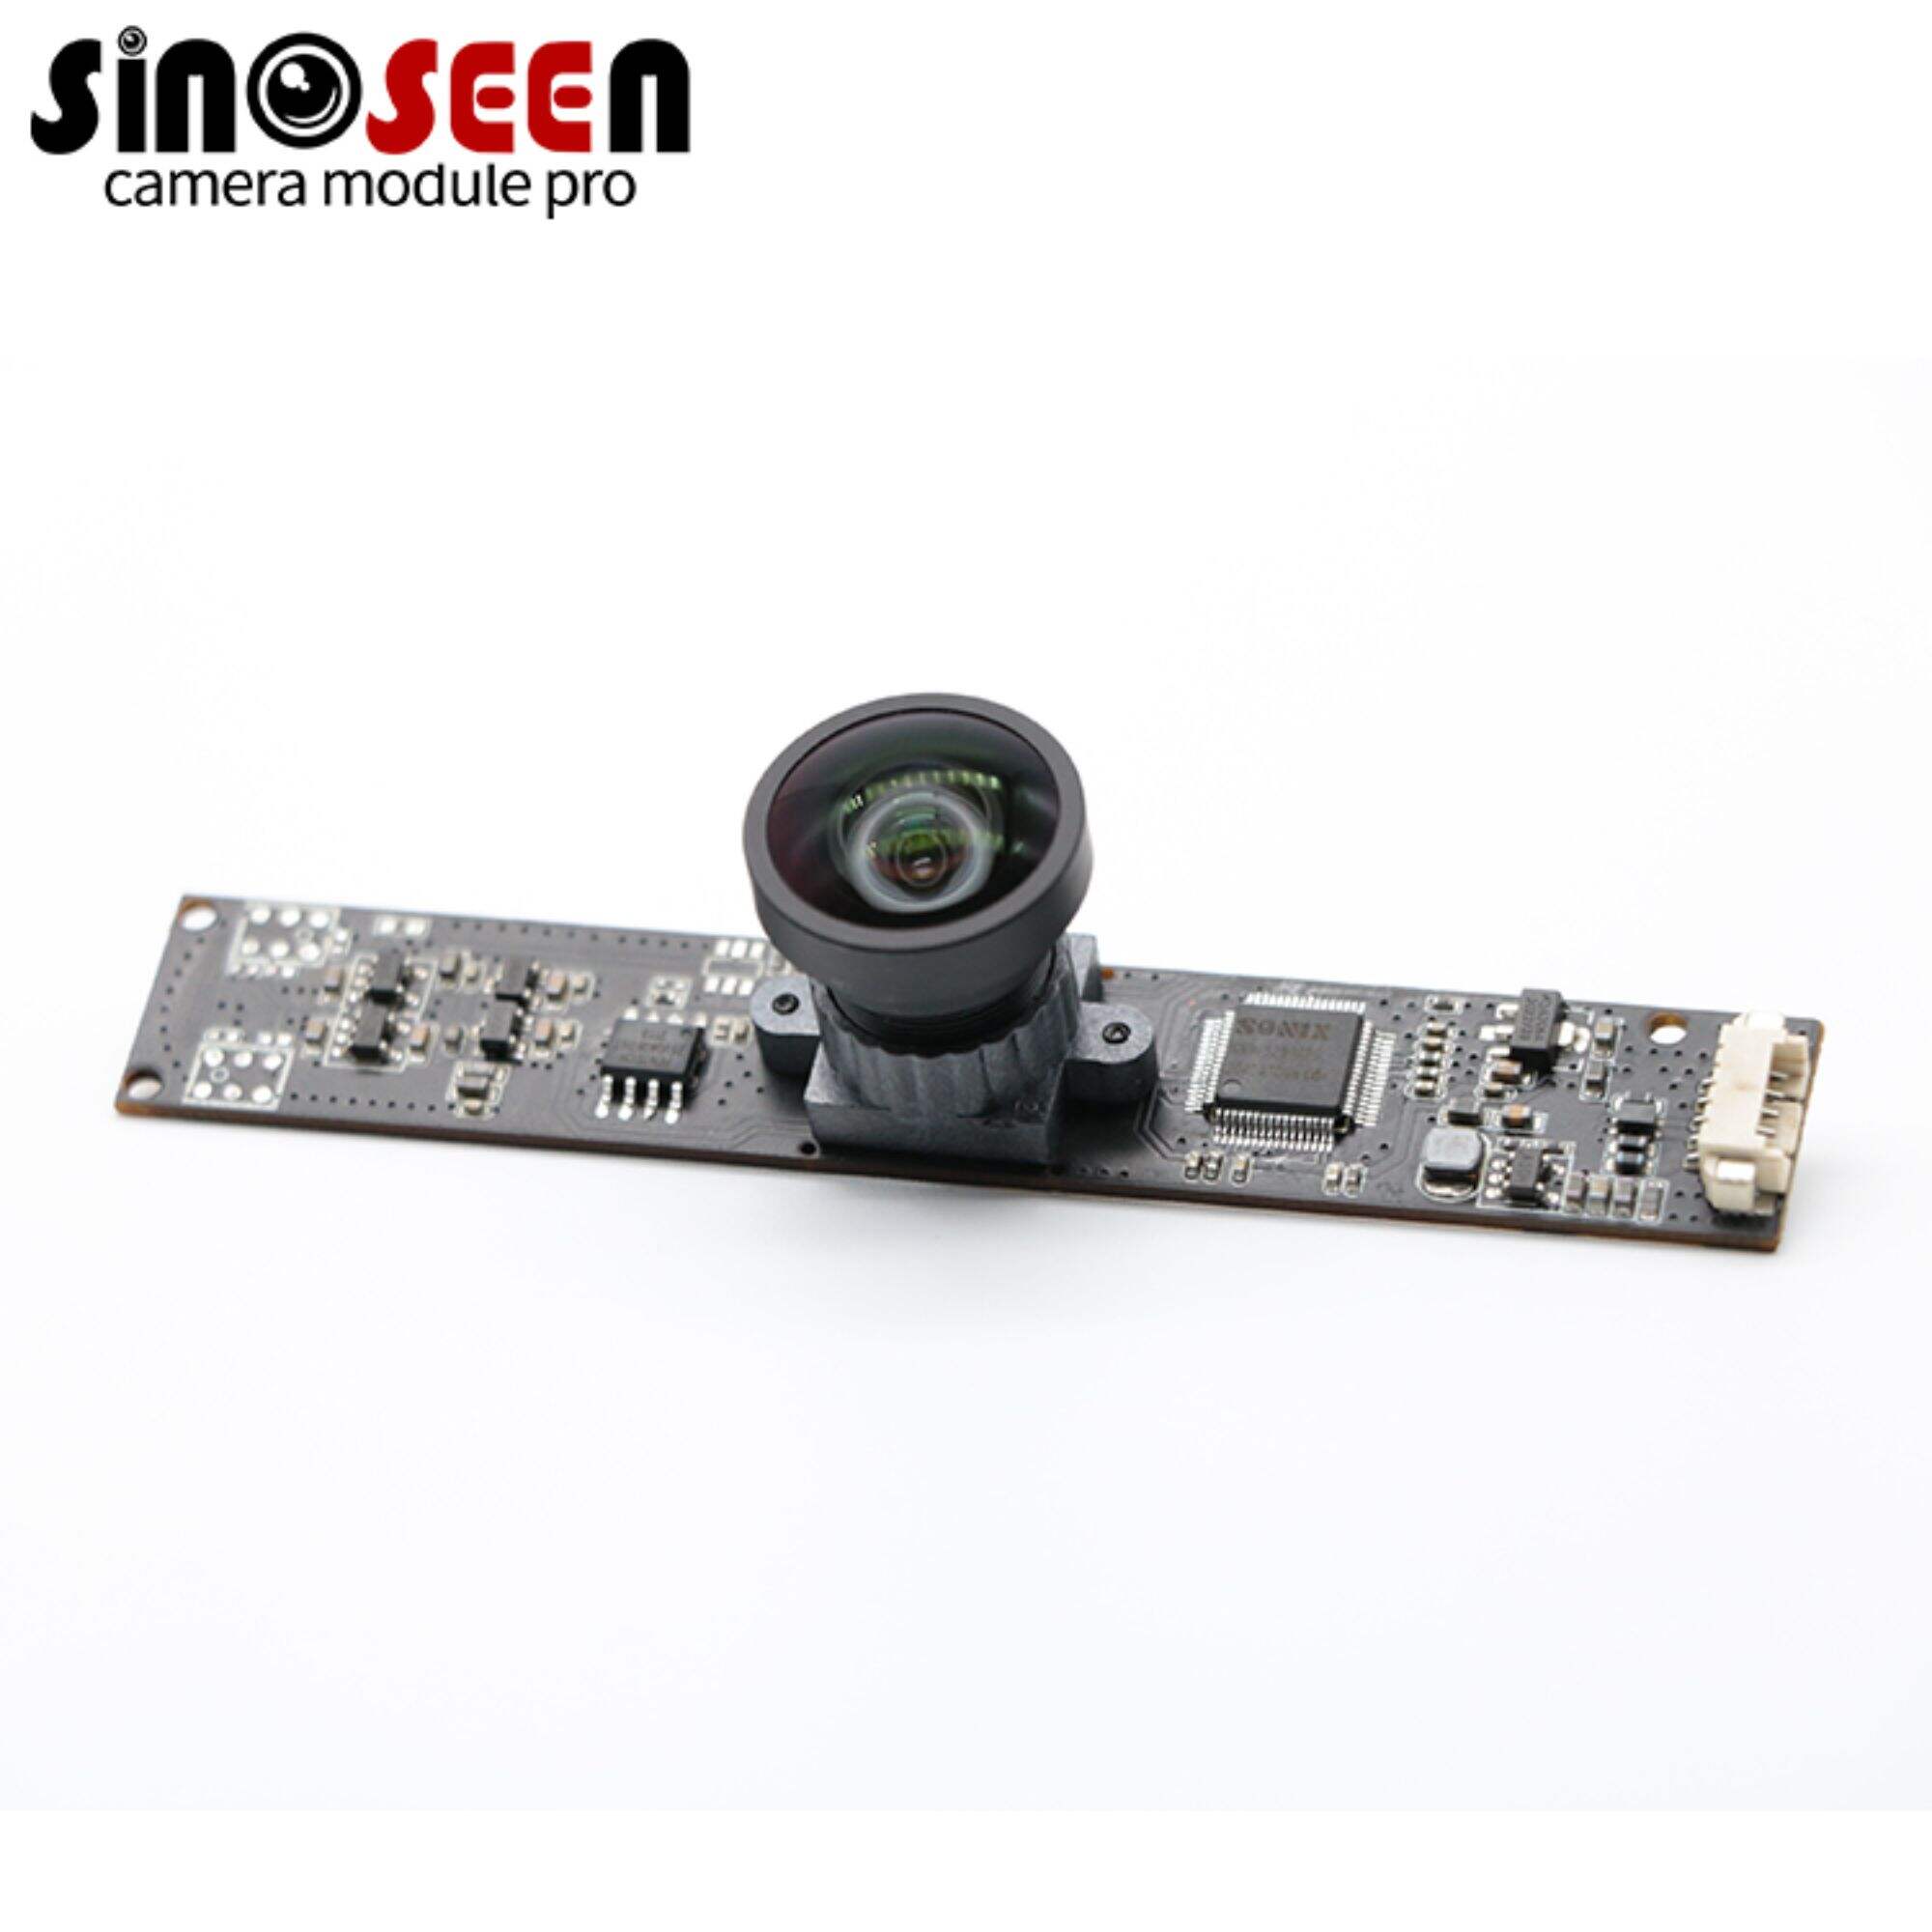 Camera Module with Sony IMX179 Sensor UHD IoT Devices 8MP Fixed Focus